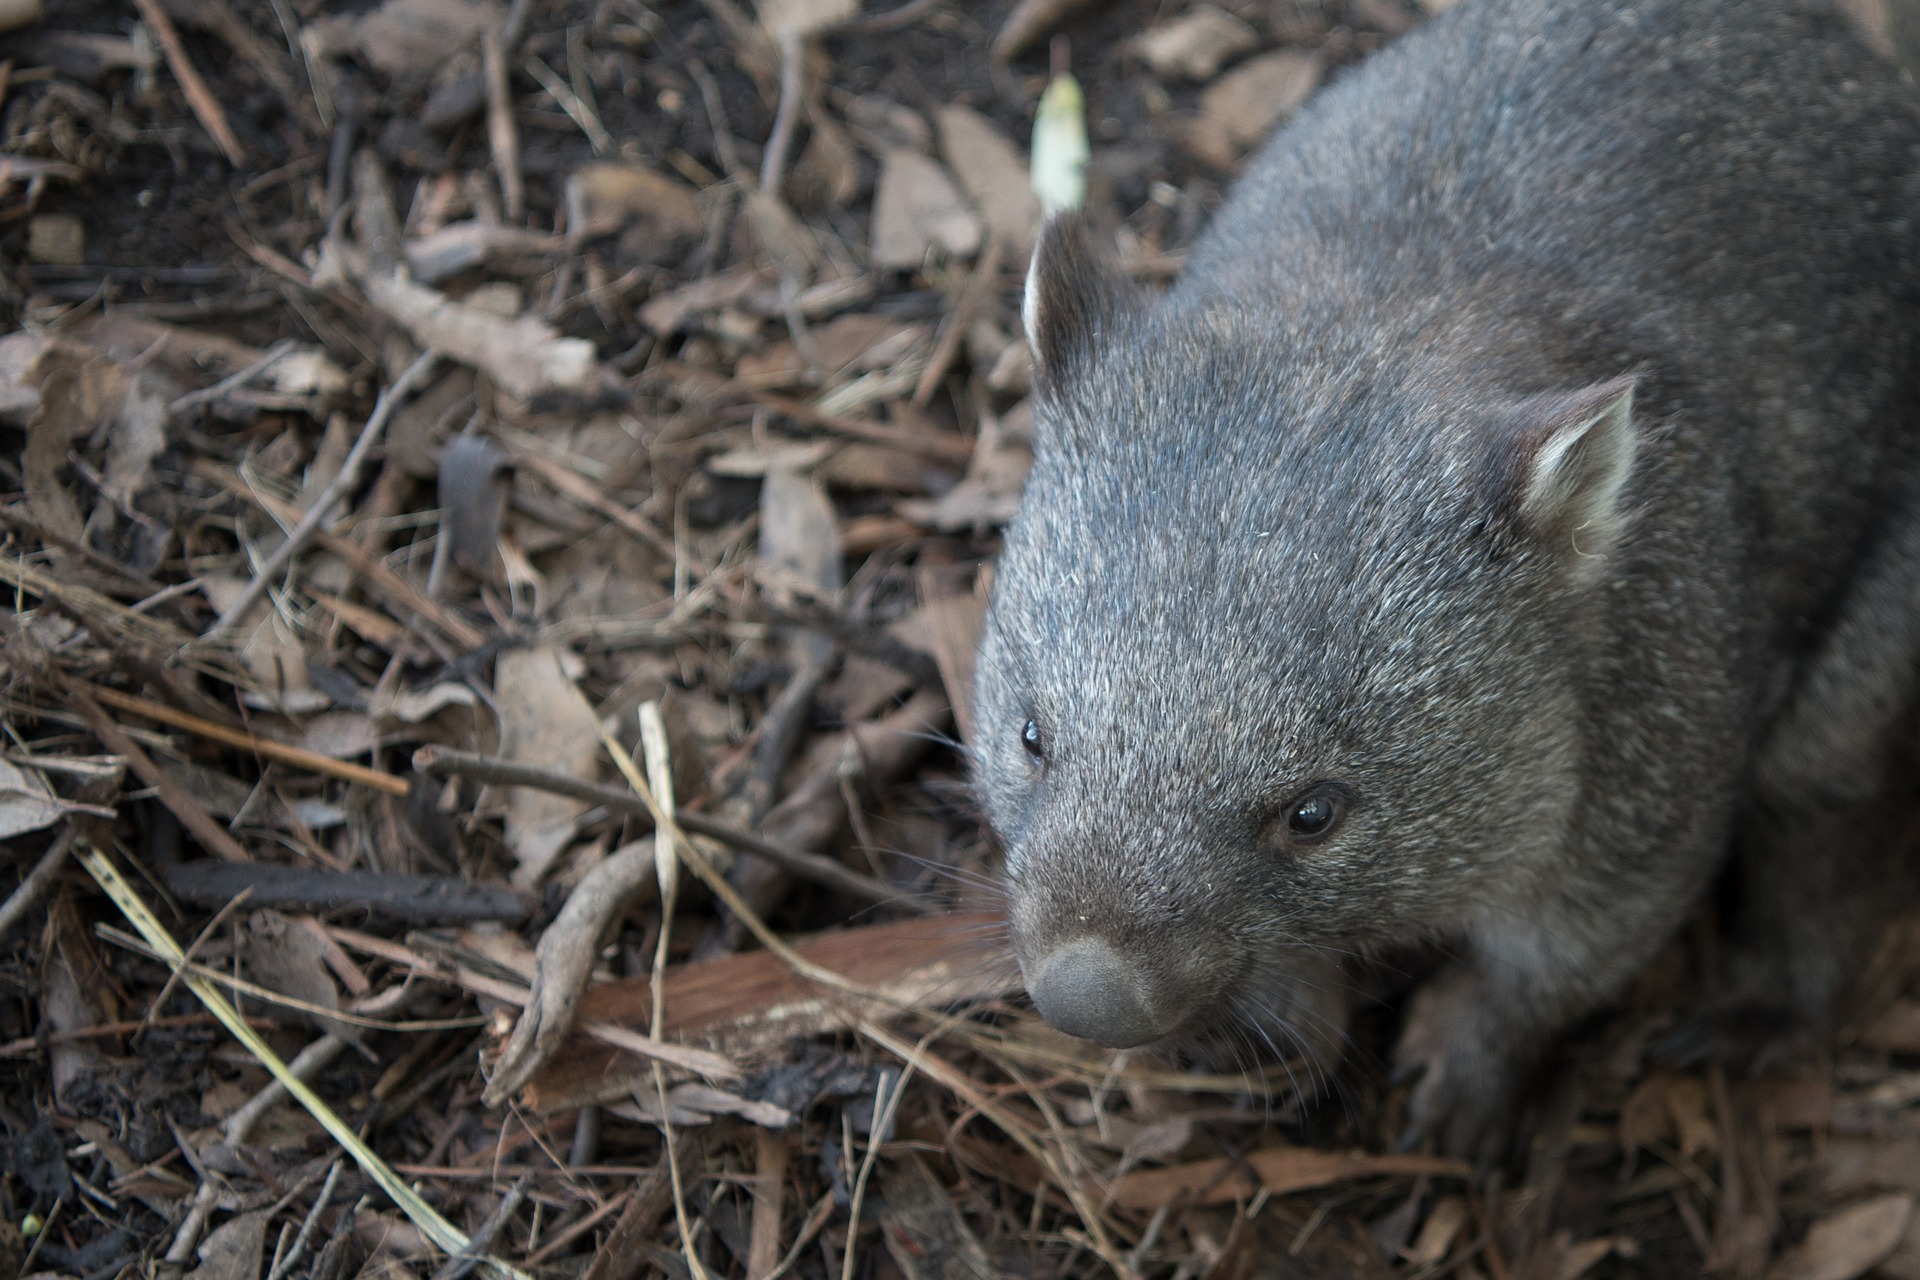 Police Officer Who Stoned Wombat Is Investigated